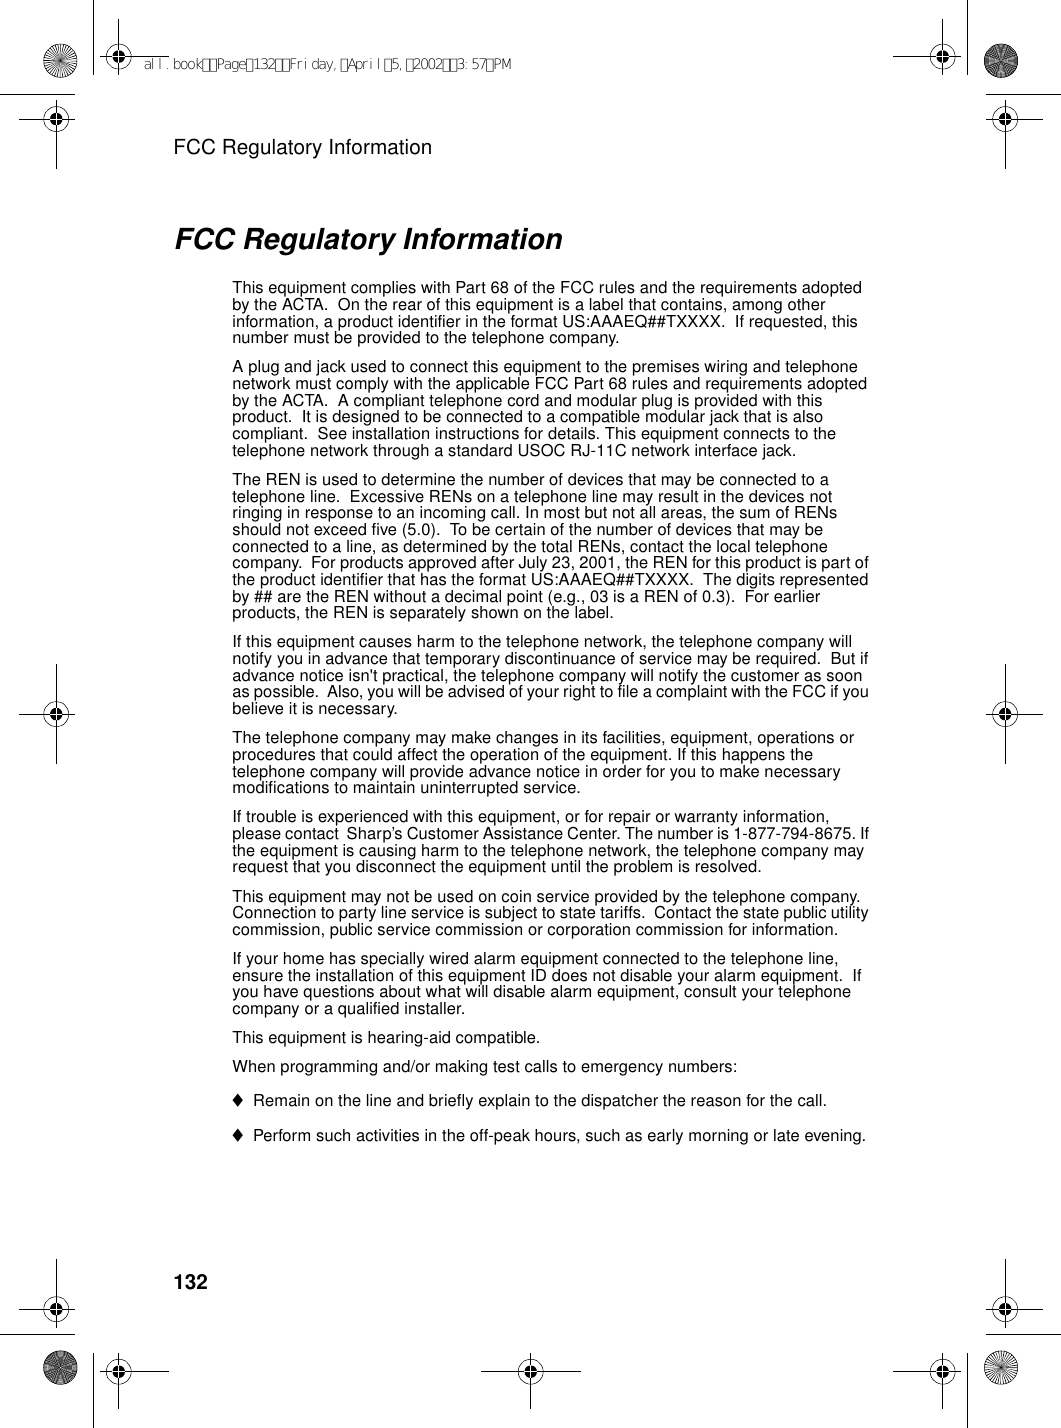 FCC Regulatory Information132FCC Regulatory InformationThis equipment complies with Part 68 of the FCC rules and the requirements adopted by the ACTA.  On the rear of this equipment is a label that contains, among other information, a product identifier in the format US:AAAEQ##TXXXX.  If requested, this number must be provided to the telephone company. A plug and jack used to connect this equipment to the premises wiring and telephone network must comply with the applicable FCC Part 68 rules and requirements adopted by the ACTA.  A compliant telephone cord and modular plug is provided with this product.  It is designed to be connected to a compatible modular jack that is also compliant.  See installation instructions for details. This equipment connects to the telephone network through a standard USOC RJ-11C network interface jack. The REN is used to determine the number of devices that may be connected to a telephone line.  Excessive RENs on a telephone line may result in the devices not ringing in response to an incoming call. In most but not all areas, the sum of RENs should not exceed five (5.0).  To be certain of the number of devices that may be connected to a line, as determined by the total RENs, contact the local telephone company.  For products approved after July 23, 2001, the REN for this product is part of the product identifier that has the format US:AAAEQ##TXXXX.  The digits represented by ## are the REN without a decimal point (e.g., 03 is a REN of 0.3).  For earlier products, the REN is separately shown on the label. If this equipment causes harm to the telephone network, the telephone company will notify you in advance that temporary discontinuance of service may be required.  But if advance notice isn&apos;t practical, the telephone company will notify the customer as soon as possible.  Also, you will be advised of your right to file a complaint with the FCC if you believe it is necessary. The telephone company may make changes in its facilities, equipment, operations or procedures that could affect the operation of the equipment. If this happens the telephone company will provide advance notice in order for you to make necessary modifications to maintain uninterrupted service. If trouble is experienced with this equipment, or for repair or warranty information, please contact  Sharp’s Customer Assistance Center. The number is 1-877-794-8675. If the equipment is causing harm to the telephone network, the telephone company may request that you disconnect the equipment until the problem is resolved.This equipment may not be used on coin service provided by the telephone company. Connection to party line service is subject to state tariffs.  Contact the state public utility commission, public service commission or corporation commission for information. If your home has specially wired alarm equipment connected to the telephone line, ensure the installation of this equipment ID does not disable your alarm equipment.  If you have questions about what will disable alarm equipment, consult your telephone company or a qualified installer.This equipment is hearing-aid compatible. When programming and/or making test calls to emergency numbers: ♦Remain on the line and briefly explain to the dispatcher the reason for the call. ♦Perform such activities in the off-peak hours, such as early morning or late evening. all.bookPage132Friday,April5,20023:57PM